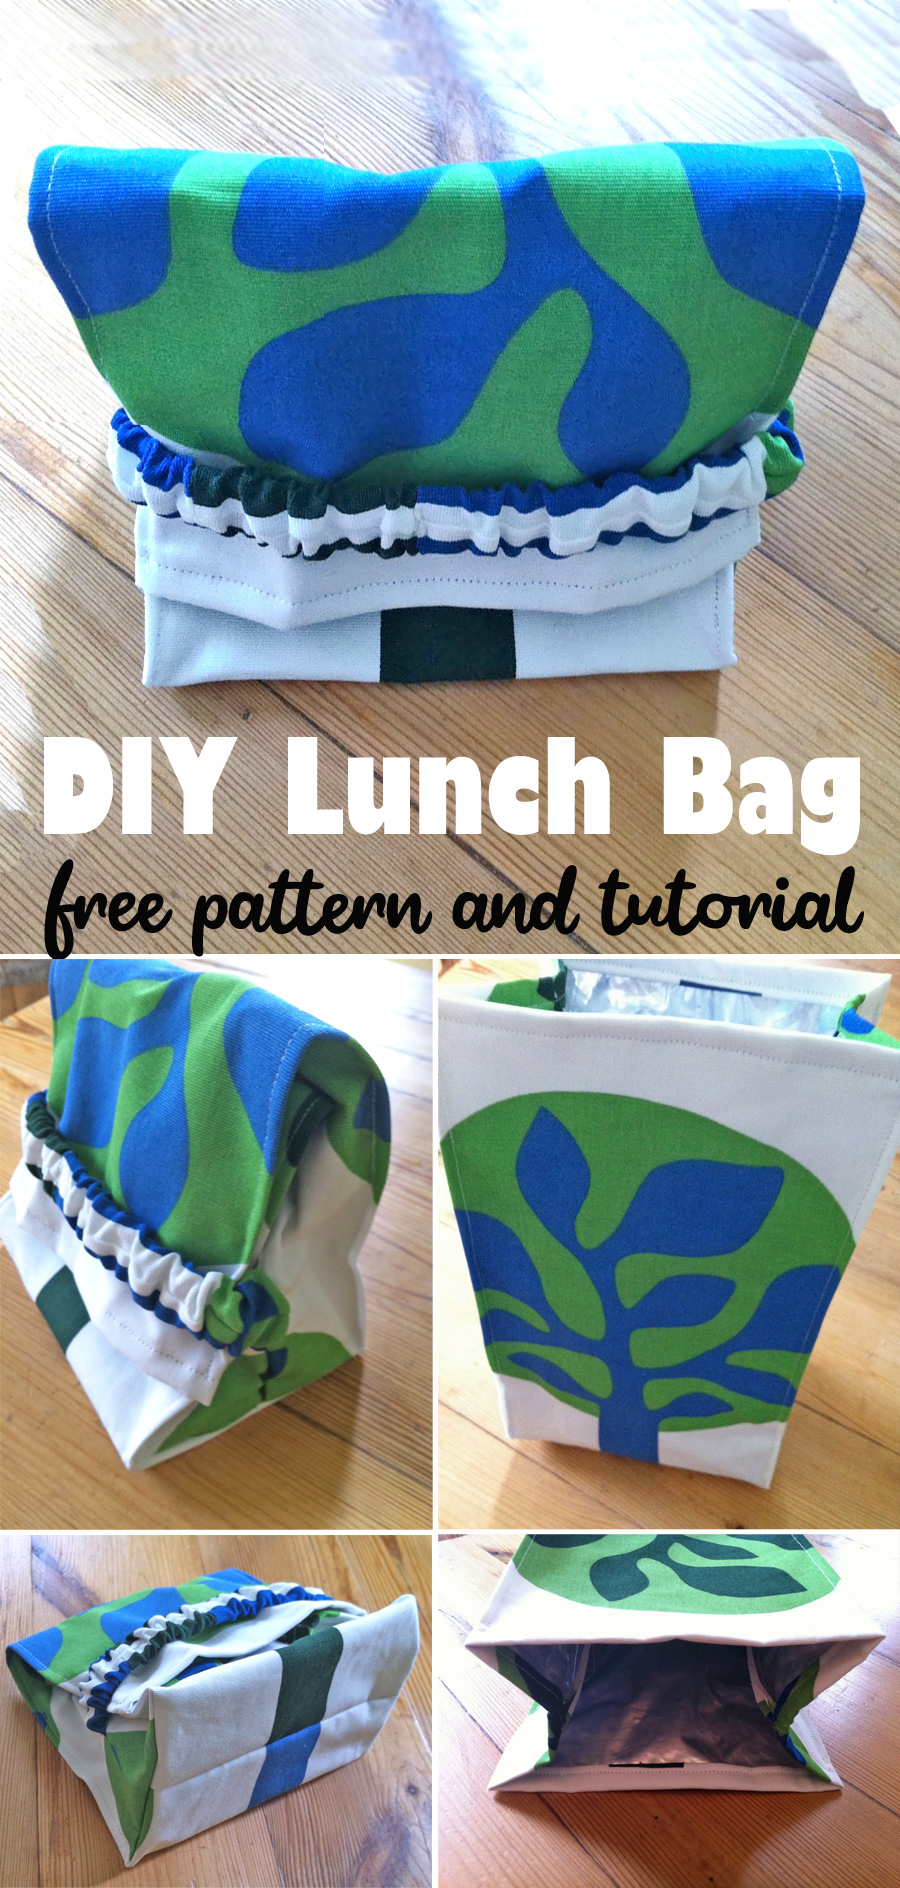 DIY Insulated Lunch Bag FREE sewing tutorial